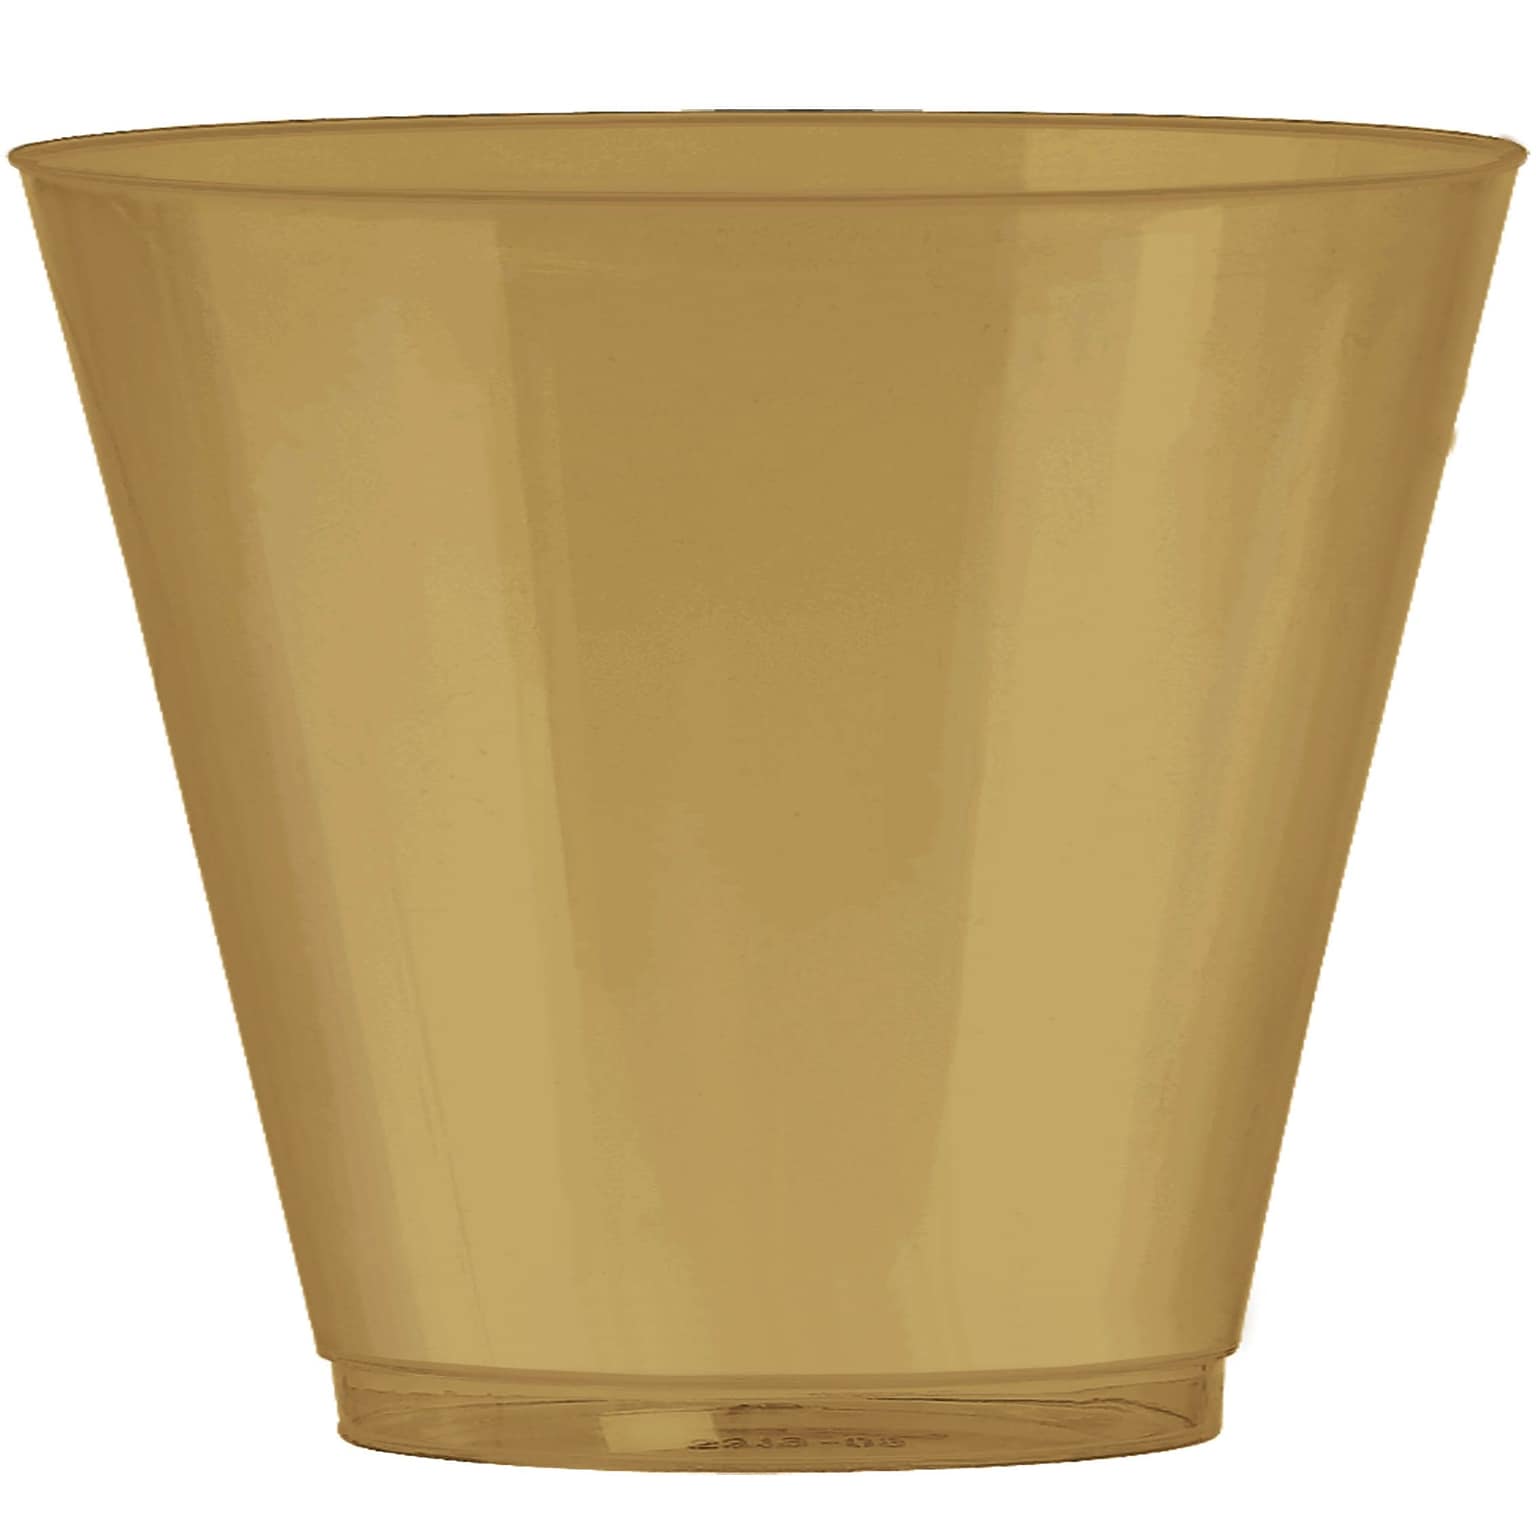 Amscan 9oz Big Party Pack Plastic Cups, Gold, 2/Pack, 72 Per Pack (350366.19)